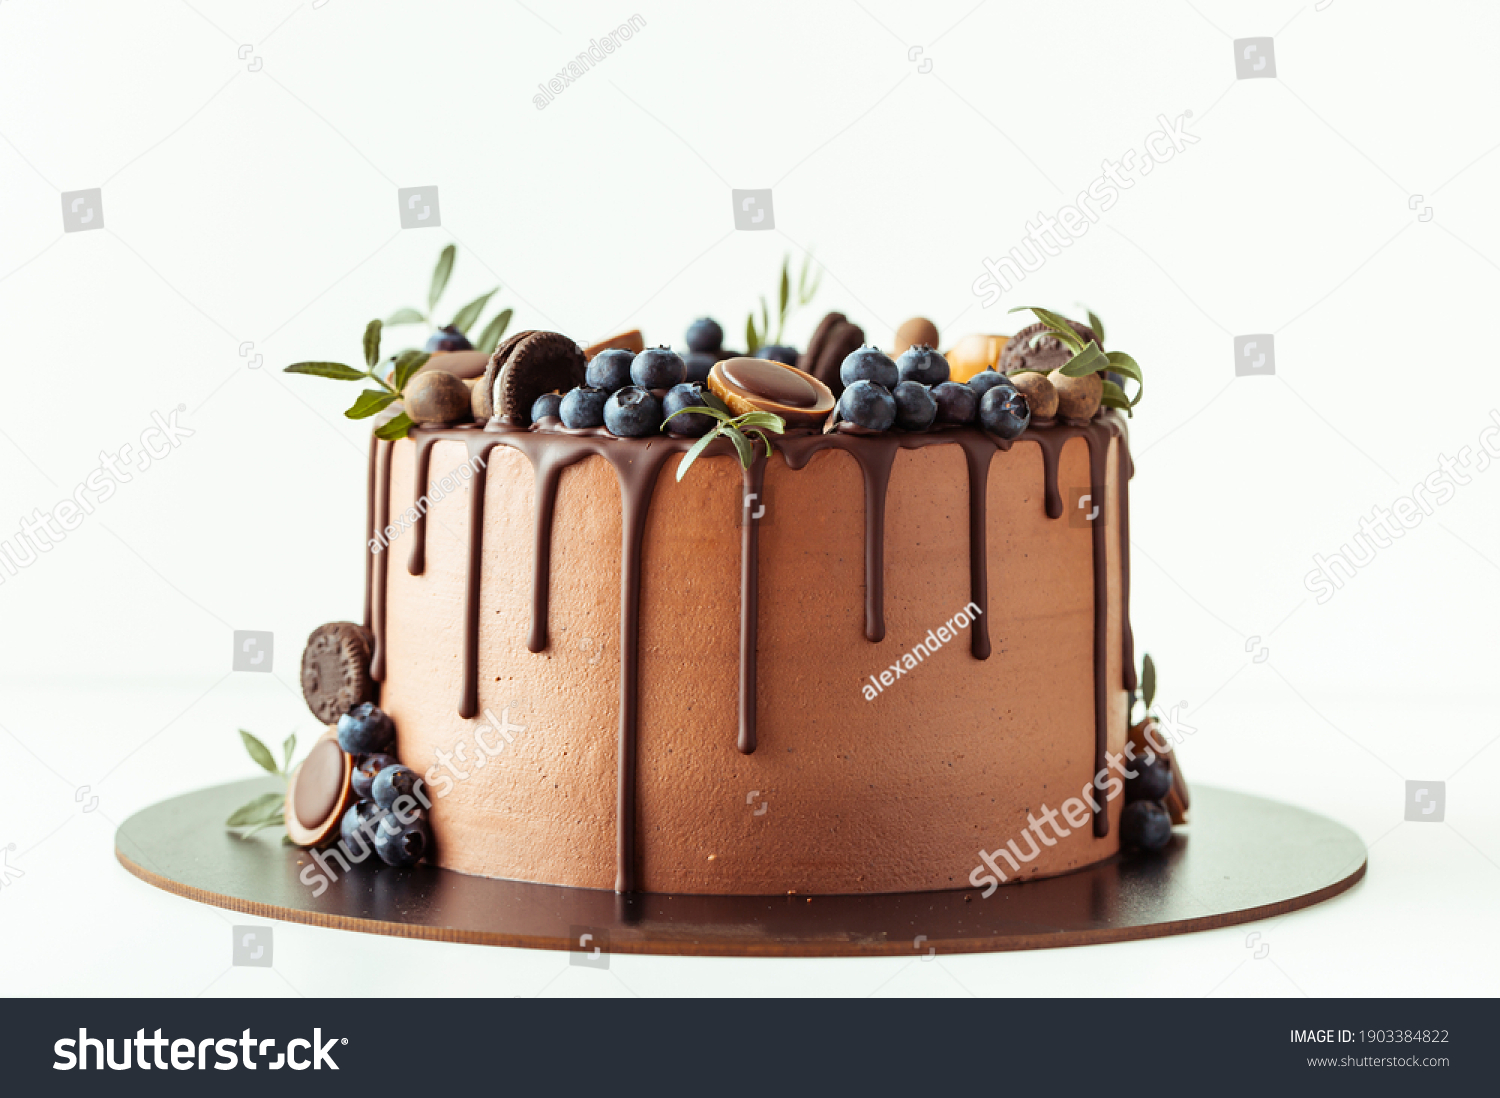 Chocolate cake decorated with blueberries, cookies and chocolates on a white background. Flat lay of the brown birthday cake #1903384822